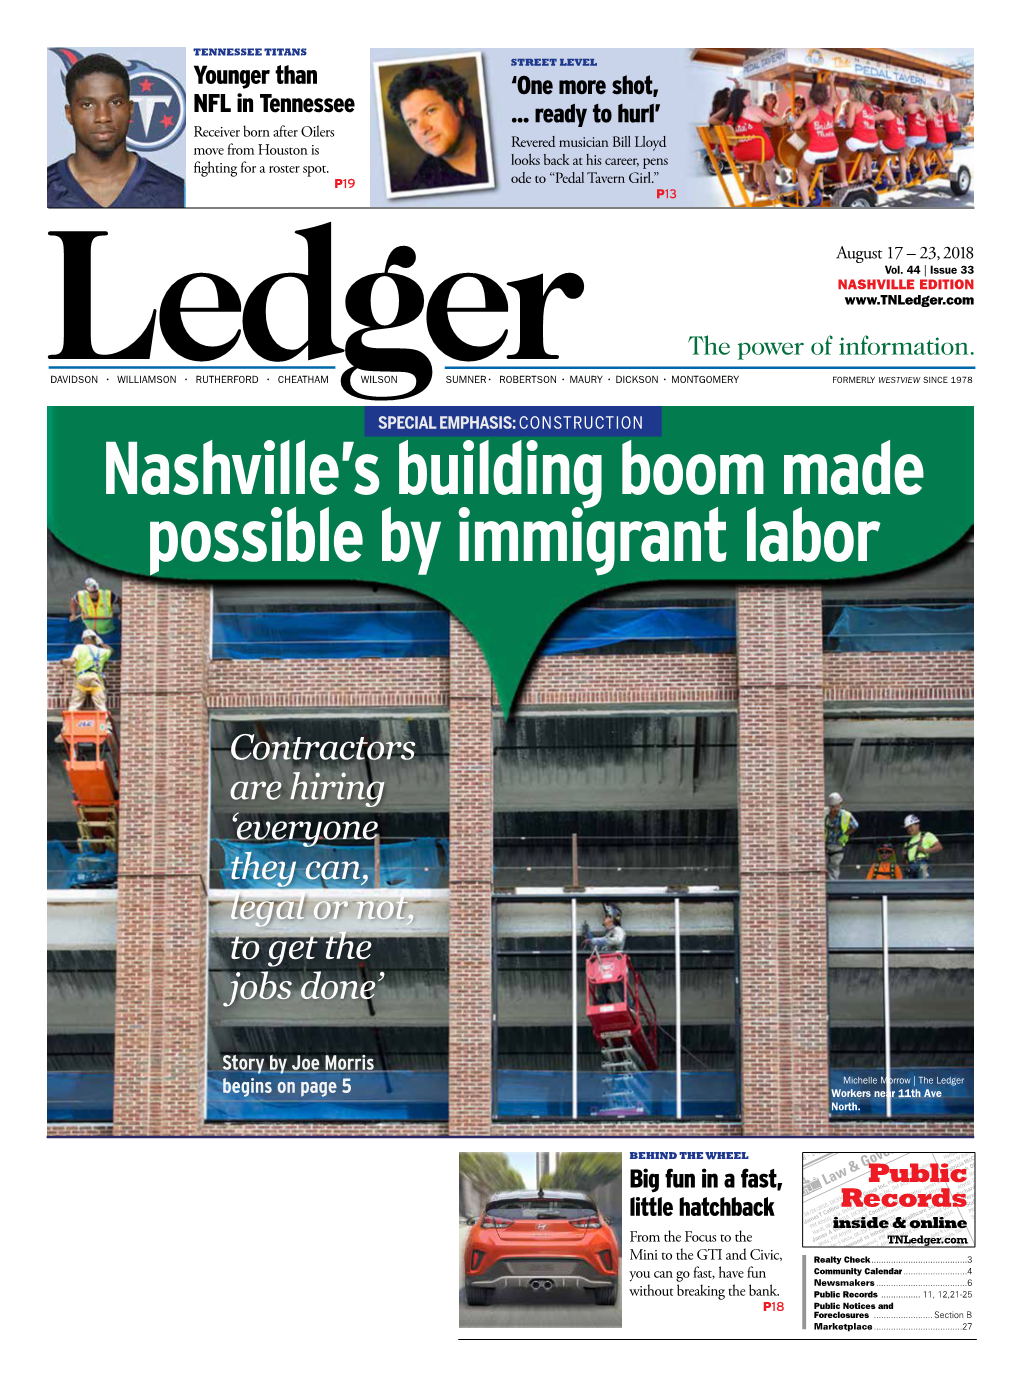 Nashville's Building Boom Made Possible by Immigrant Labor